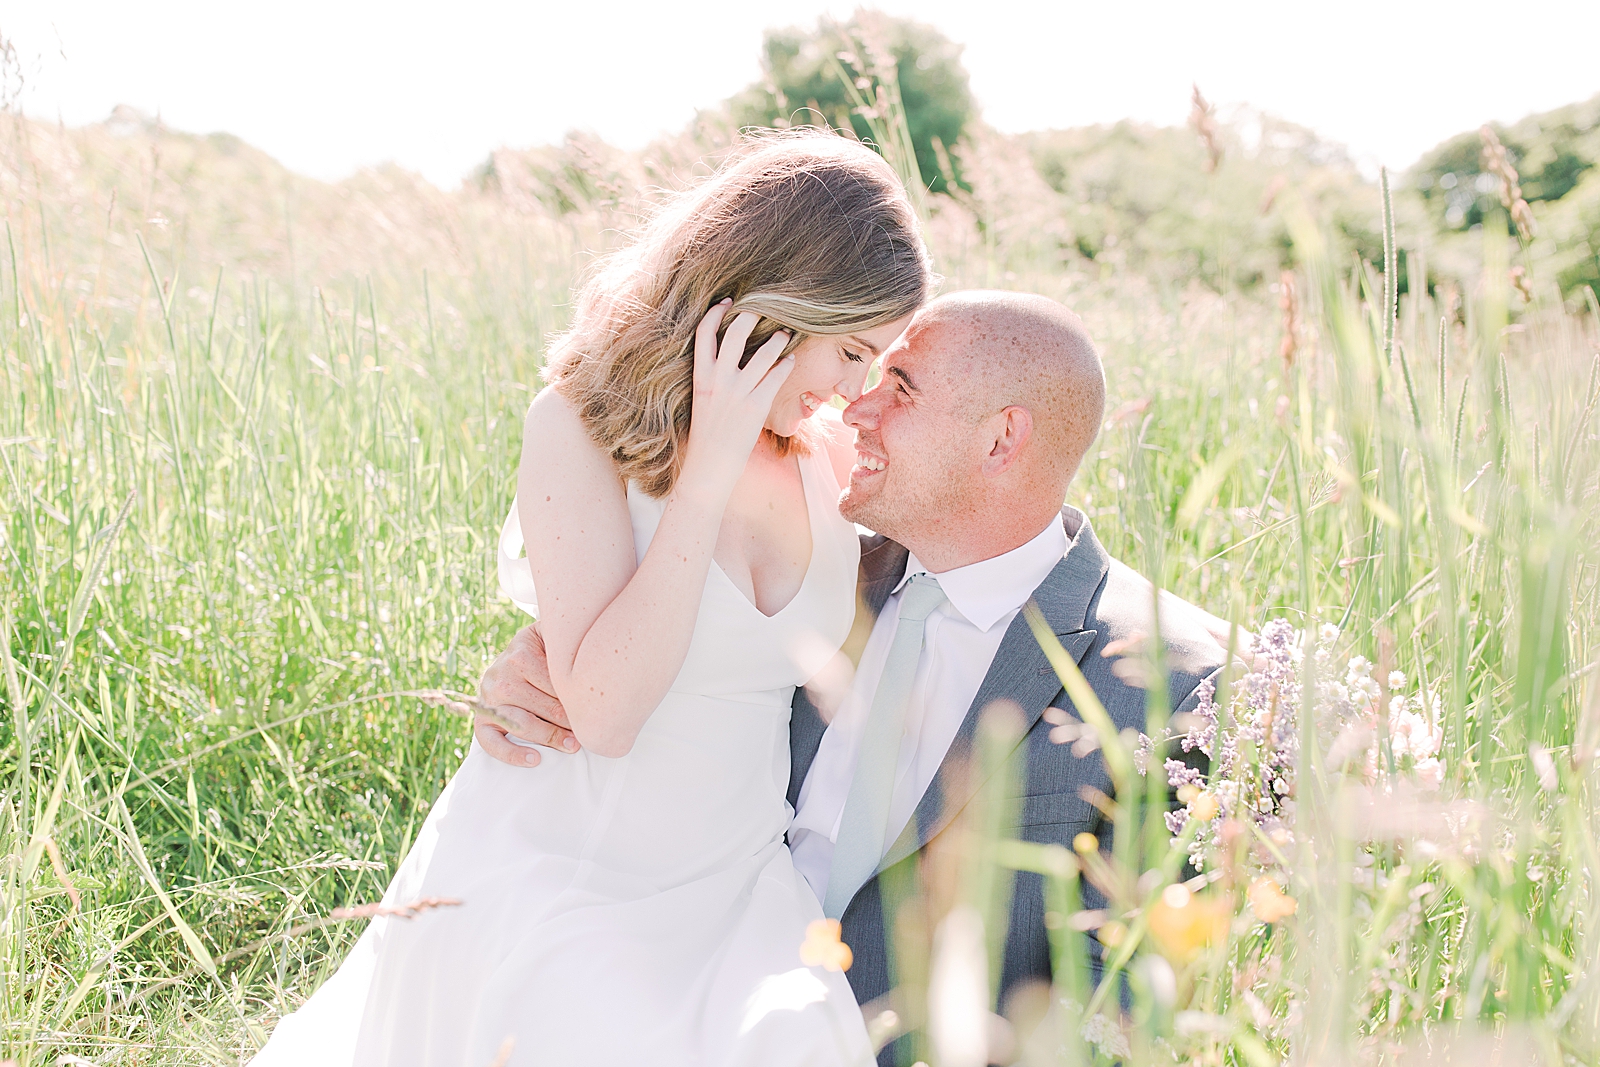 Max Patch Elopement Bride and Groom Sitting in Grass Smiling Photo